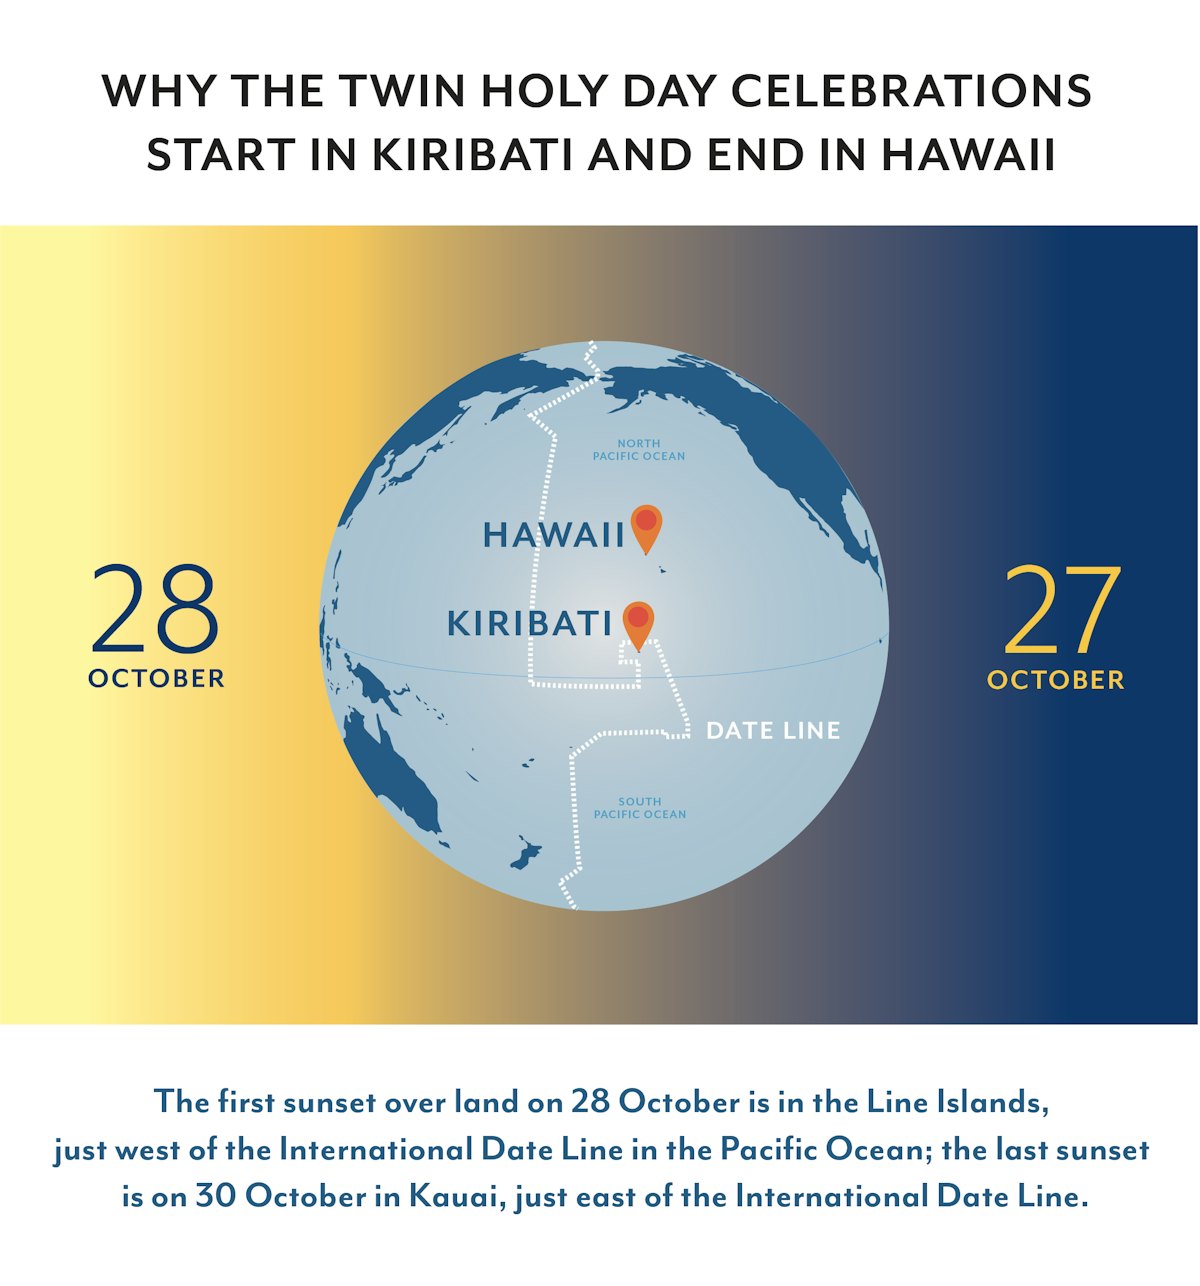 This graphic explains why the Twin Holy Day celebrations start in Kiribati and end in Hawaii.